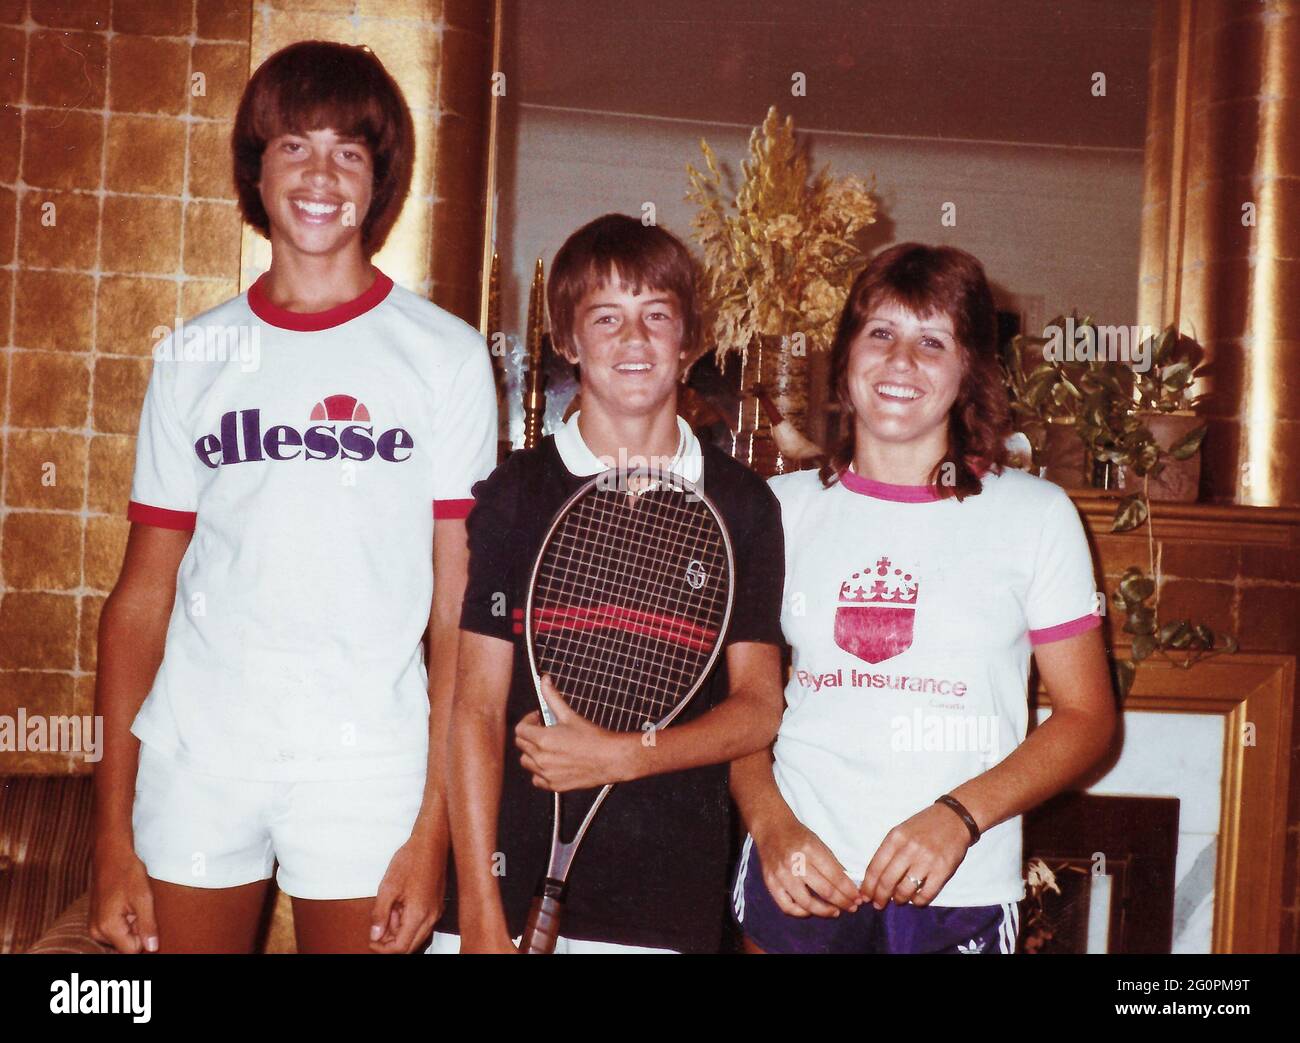 02 June 2021 - Talented junior tennis player Matthew Perry [middle] before  his role as Chandler Bing on ''Friends'' one of the most beloved shows in  television history. File Photo: Personal Photo